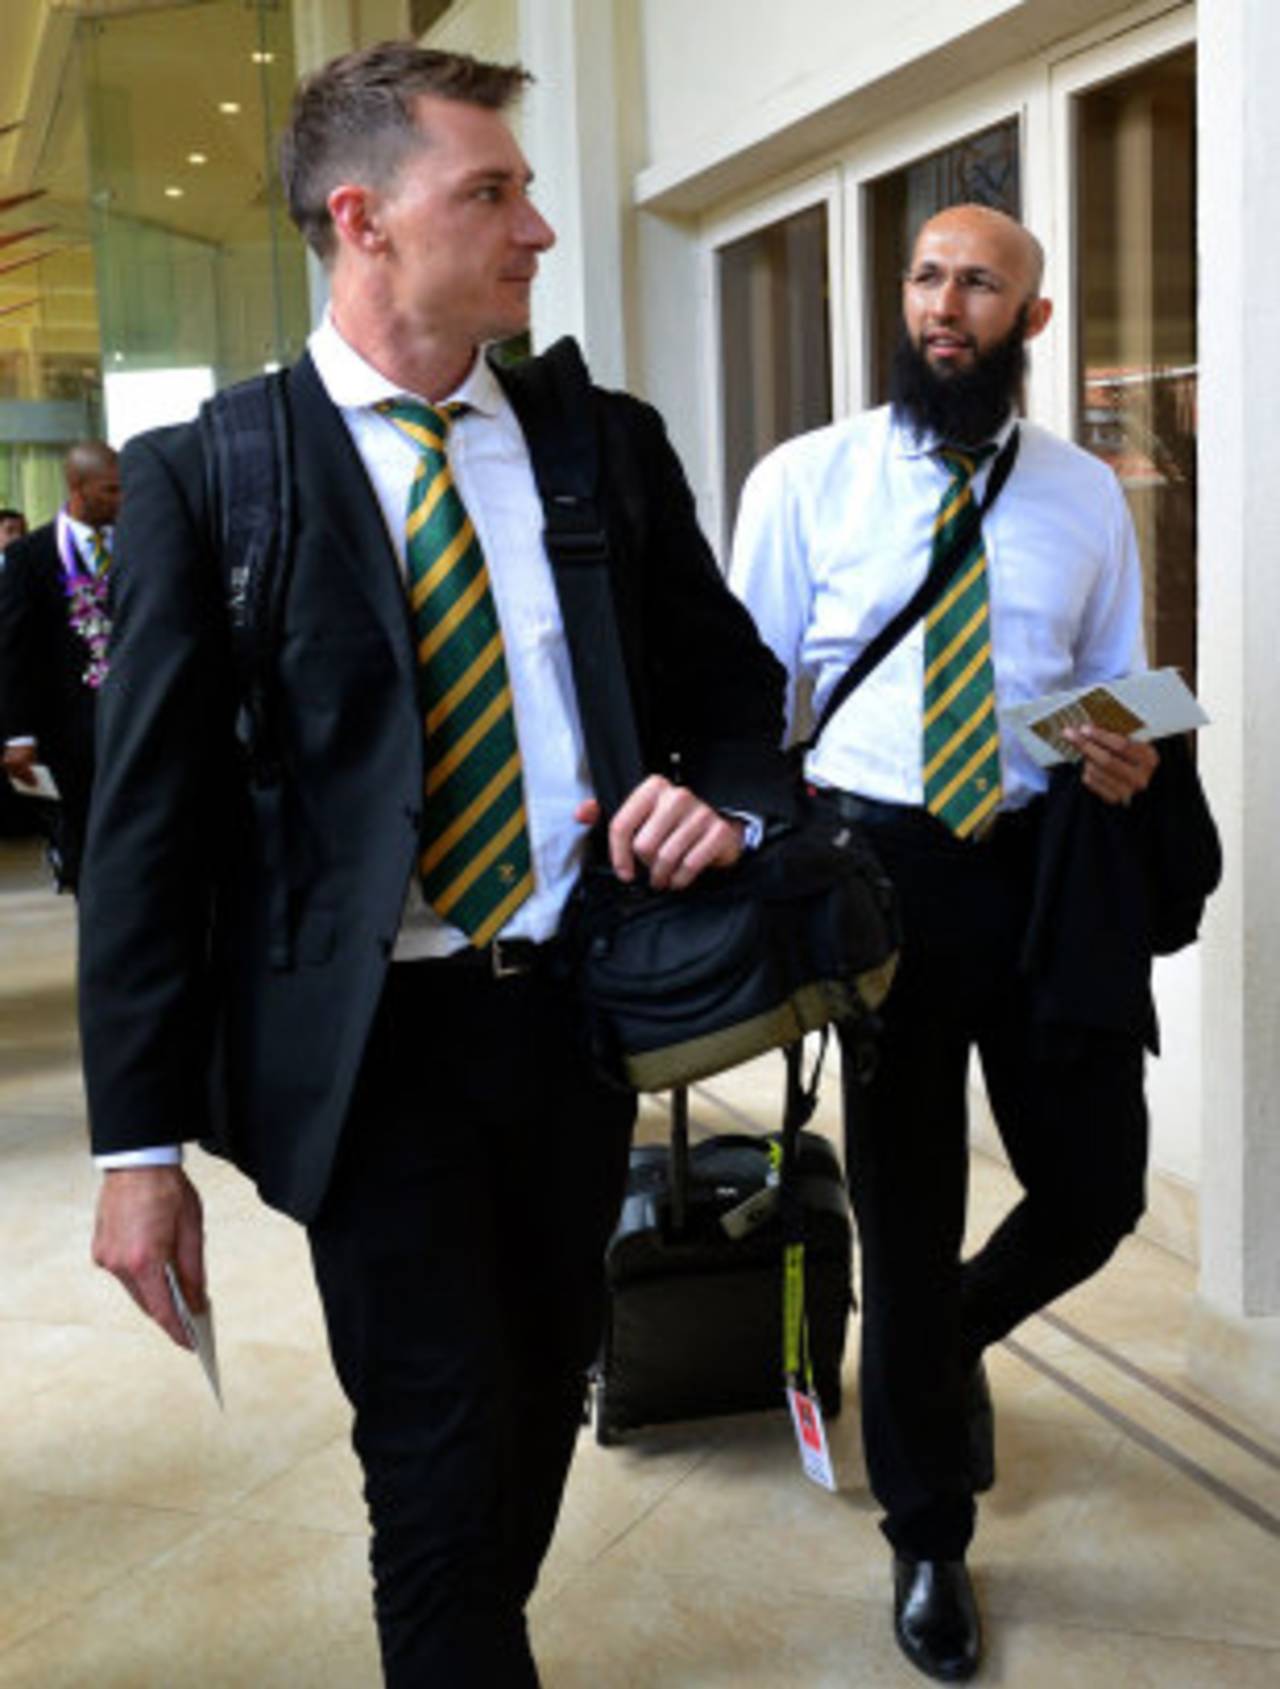 Dale Steyn and Hashim Amla at a hotel in Colombo, June 30, 2014